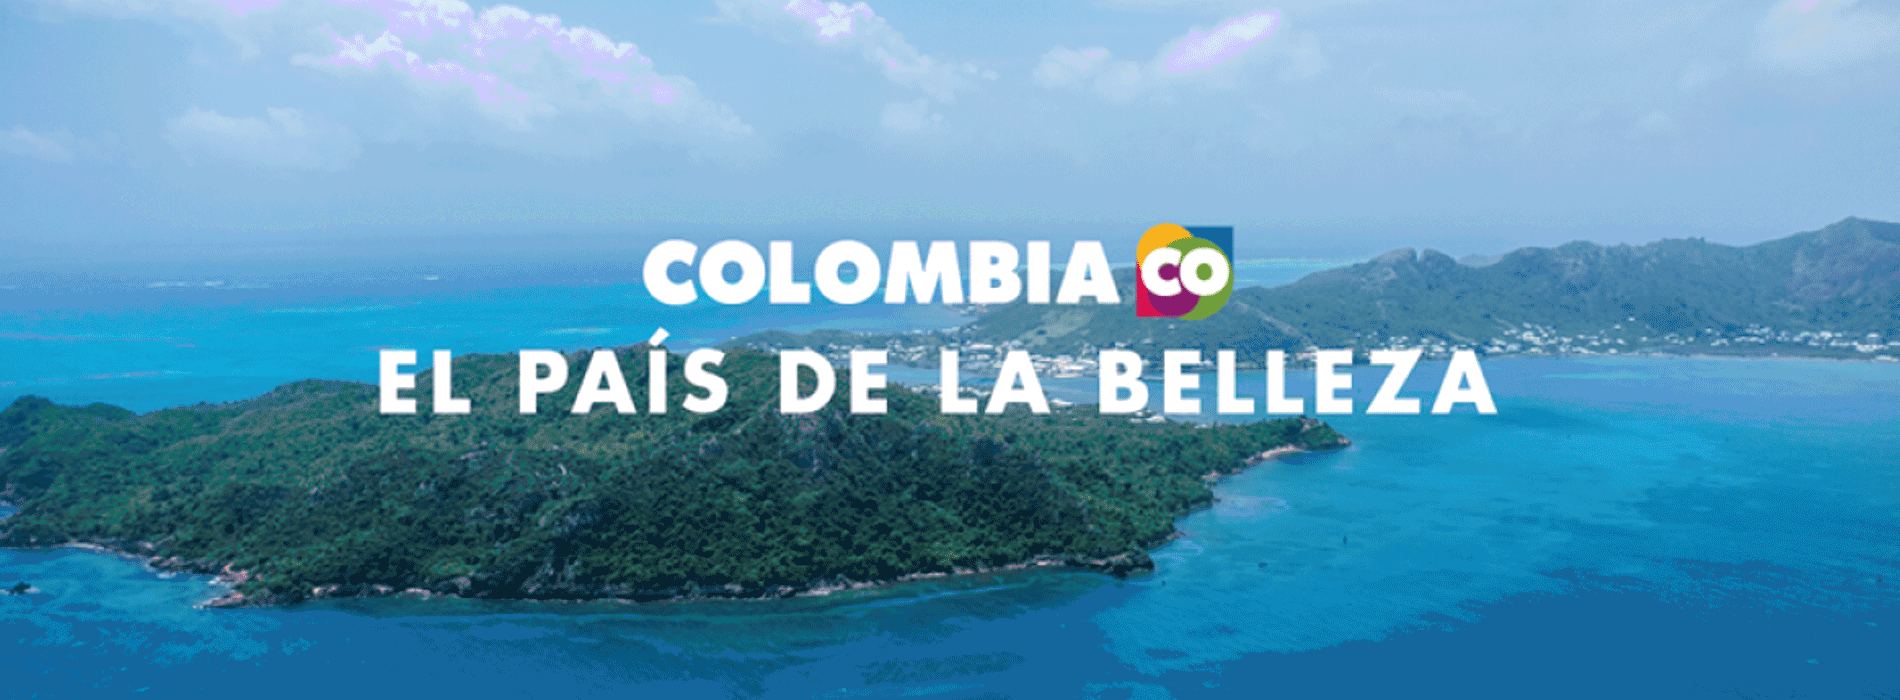 Colombia Co banner with island in the background